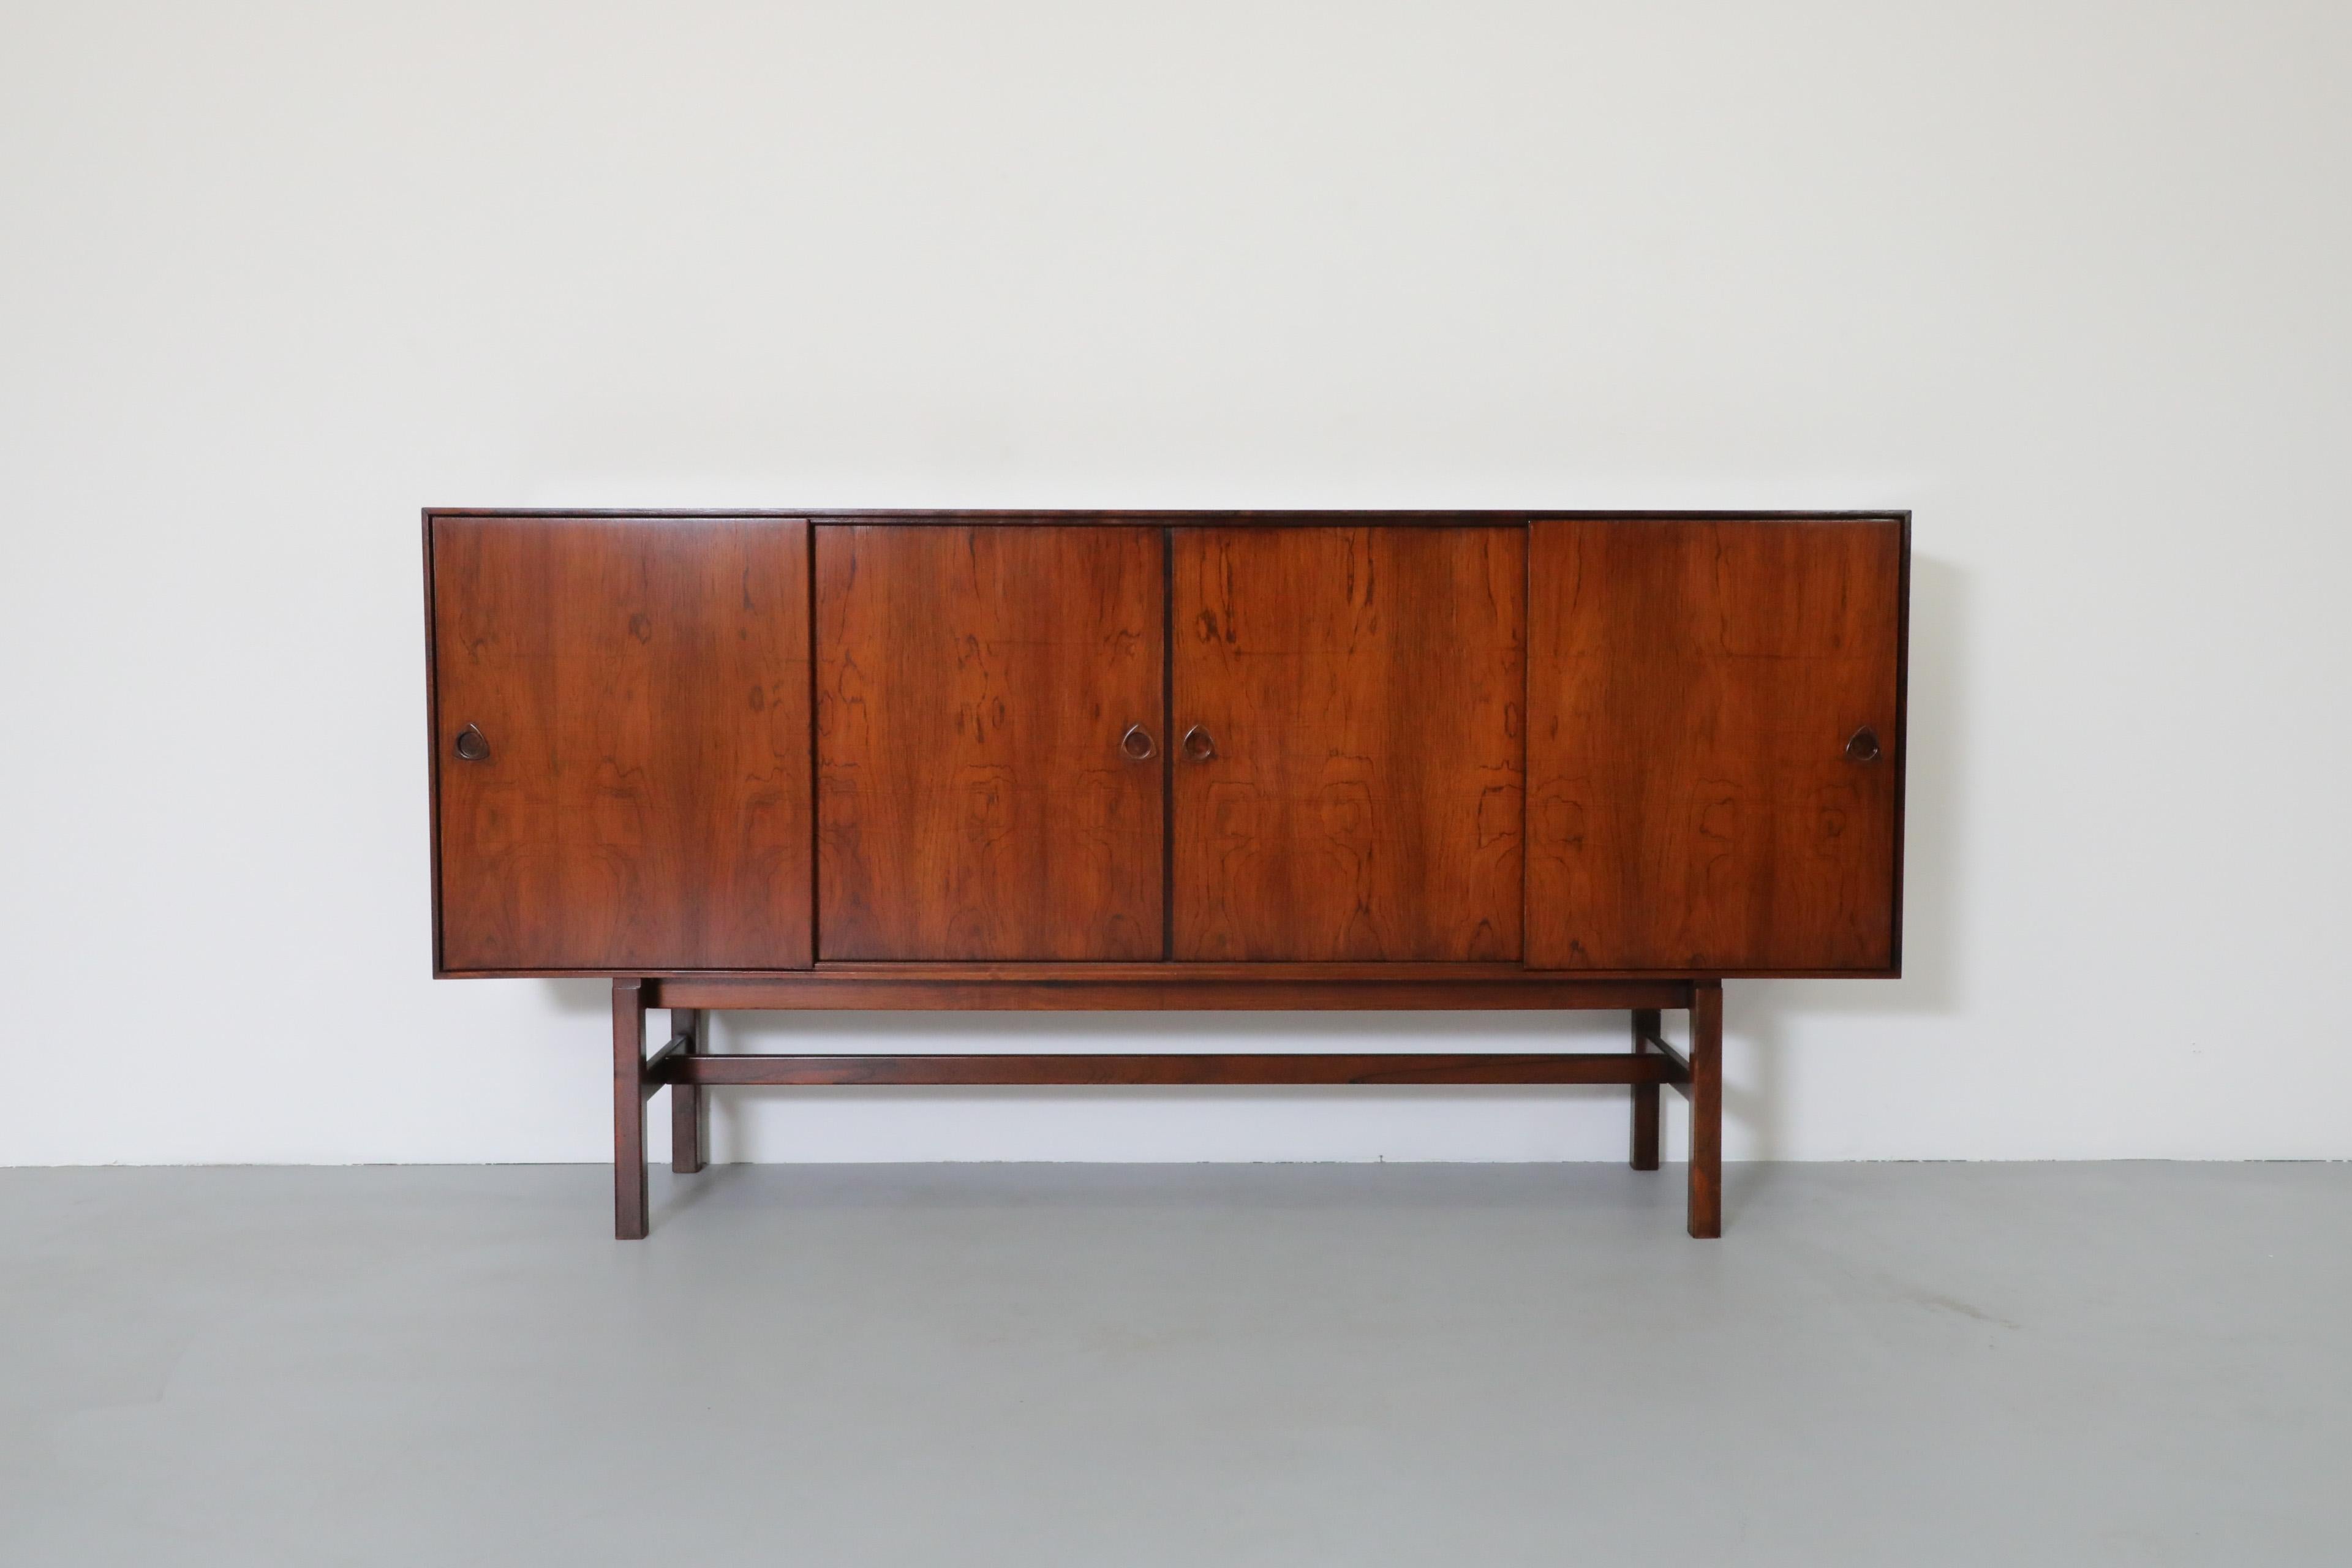 Beautiful Mid-Century Modern Danish rosewood highboard designed by Erik Brouer for Brouer Møbelfabrik. The highboard has shelving on both sides as well as bar with a mirror and light in the bar section. The light has an internal switch and turns on